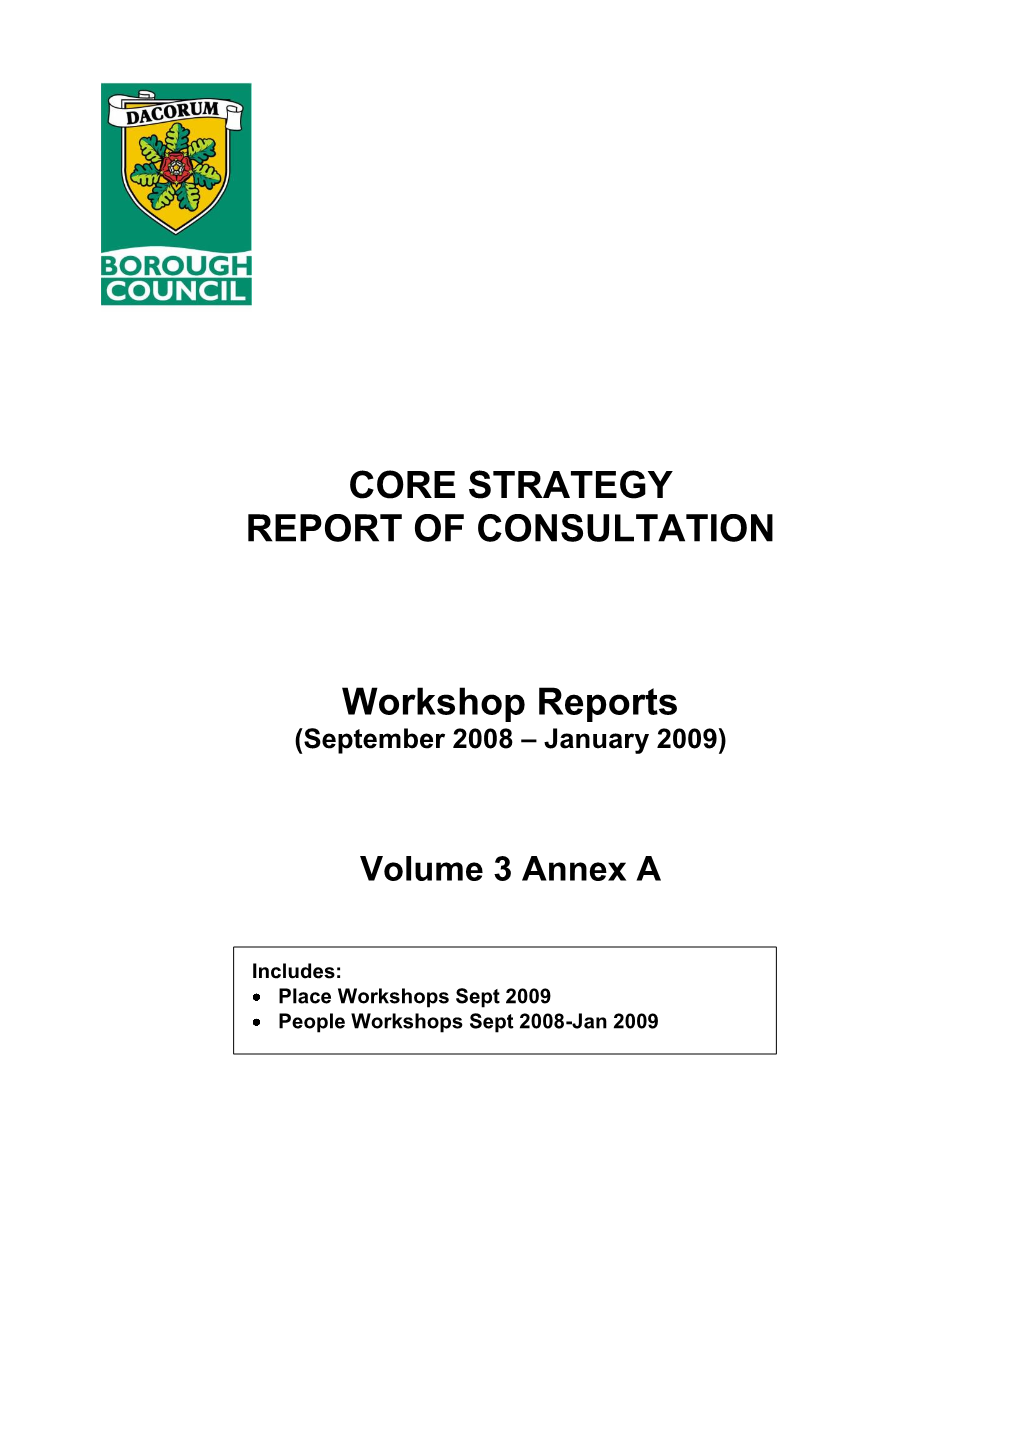 CORE STRATEGY REPORT of CONSULTATION Workshop Reports